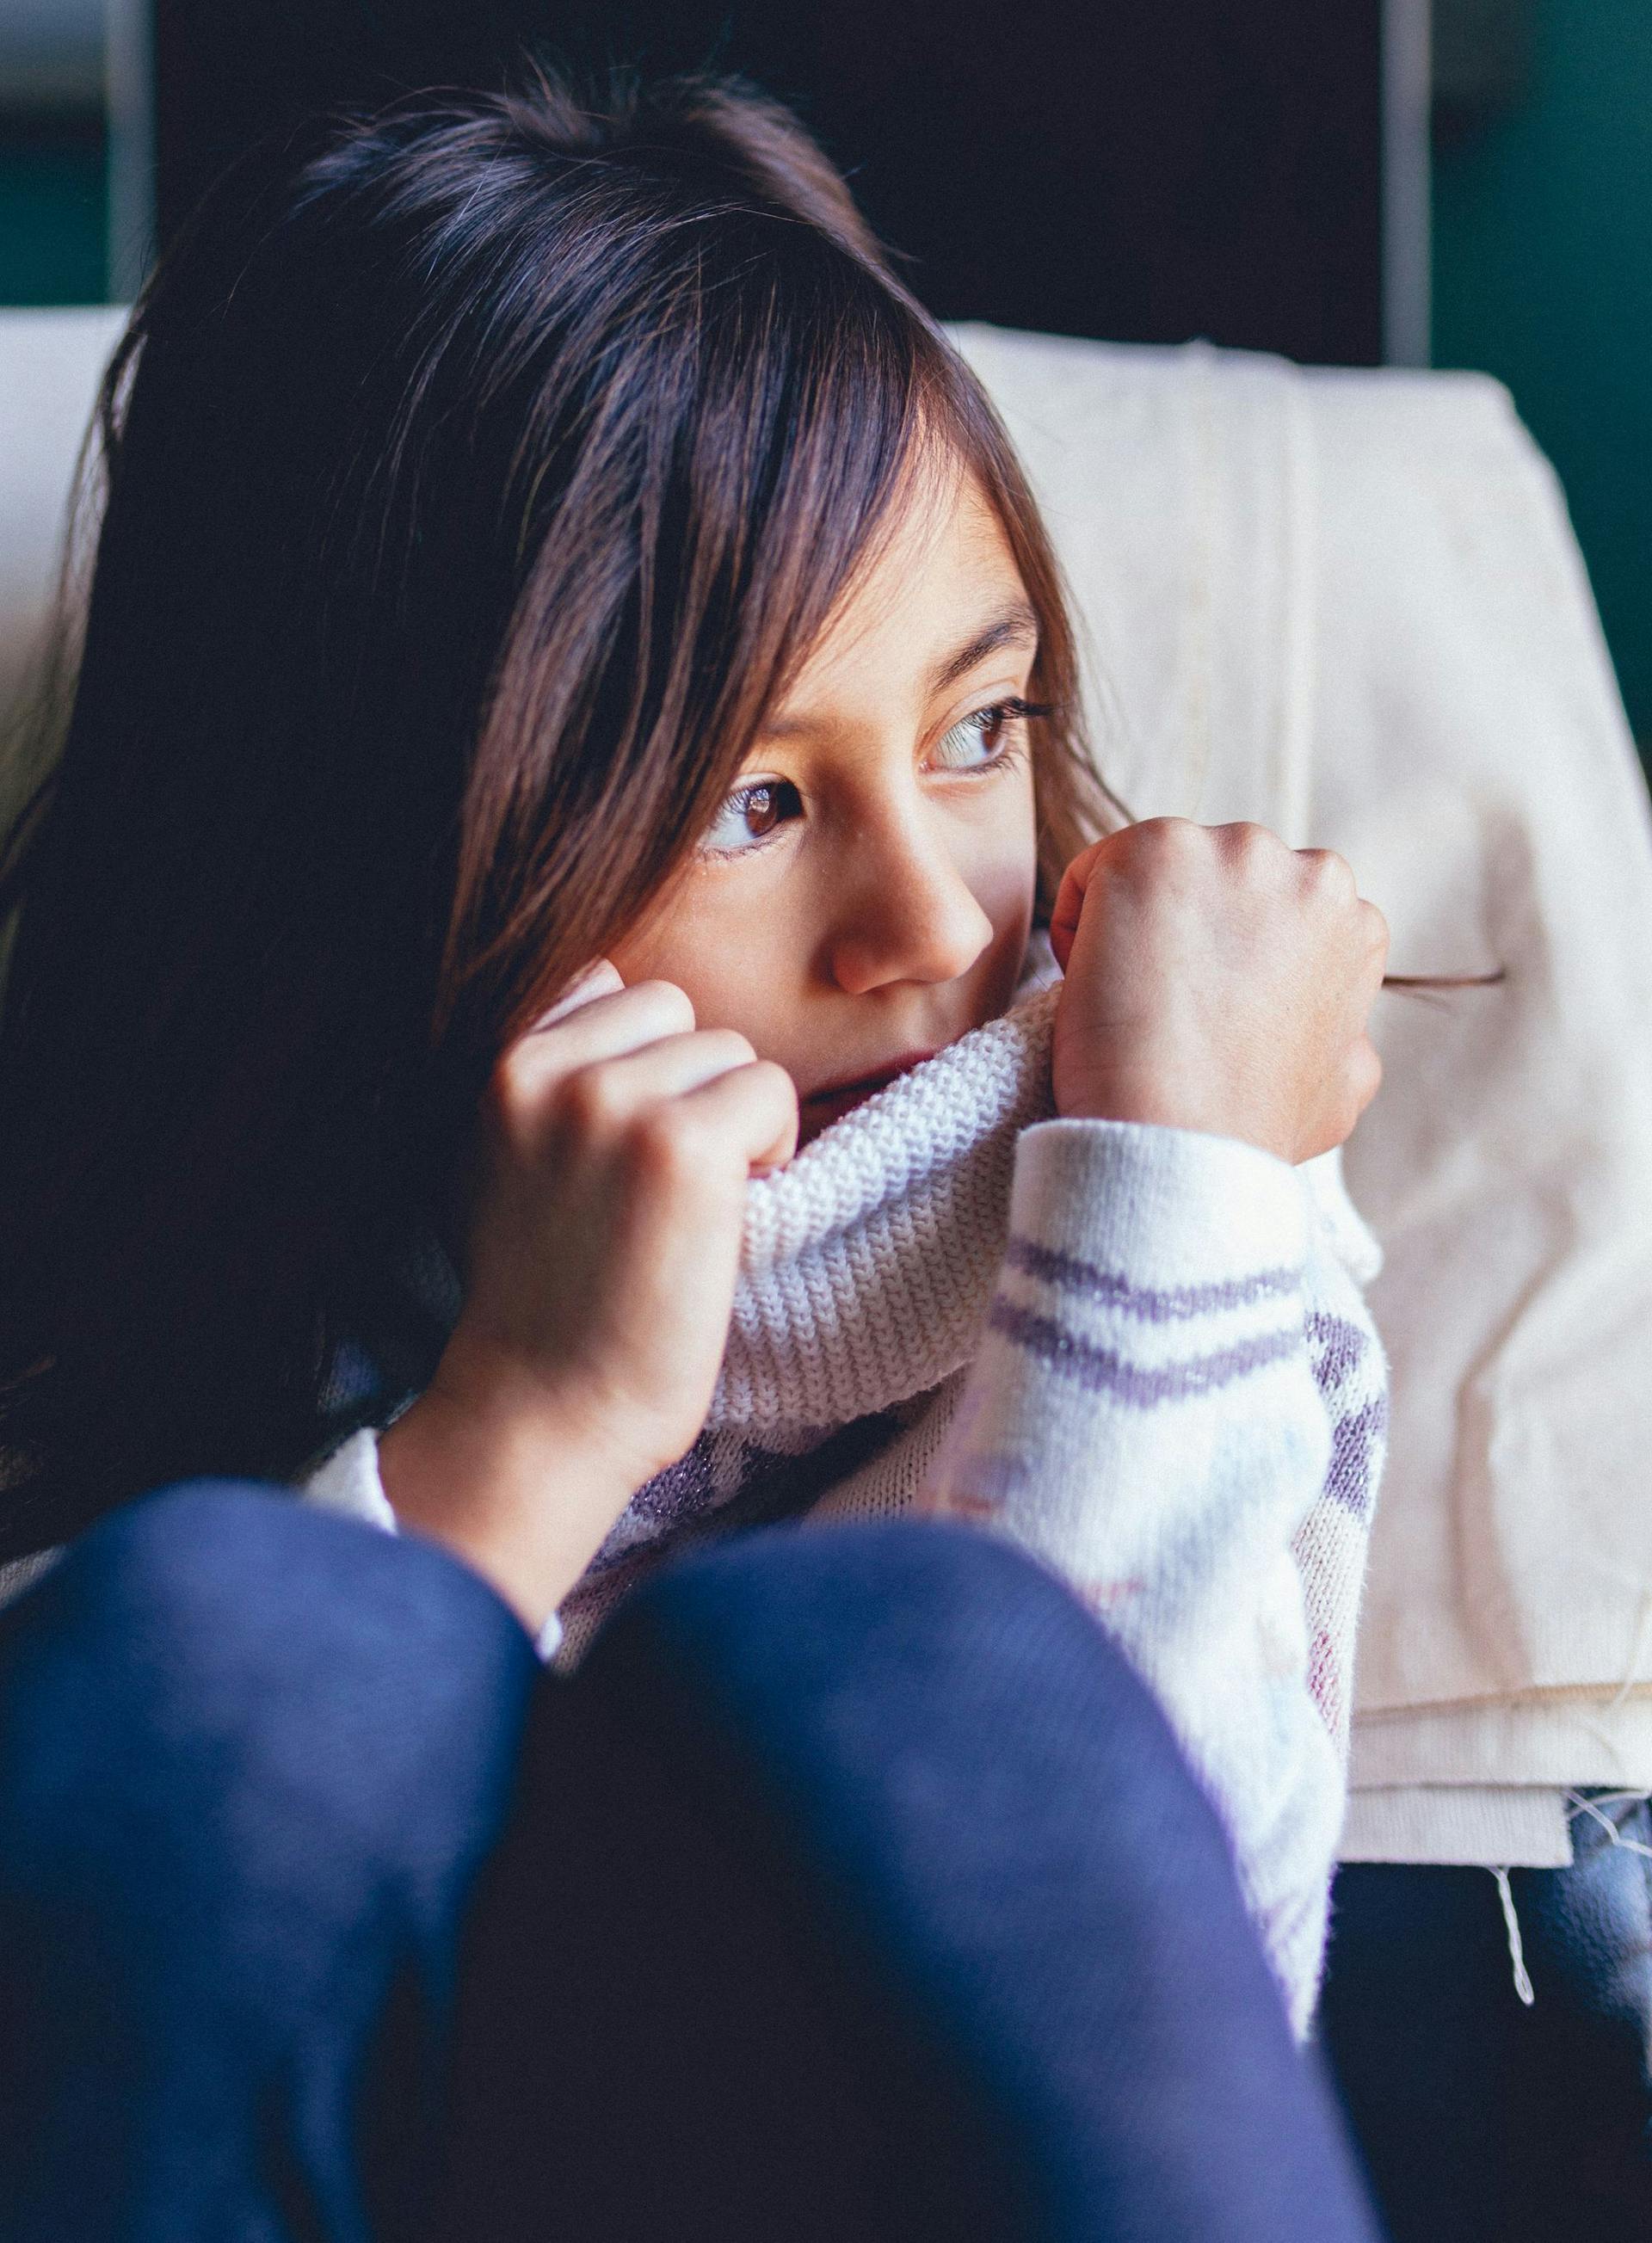 How to Help Kids Feel Less Stressed and Anxious During the Holidays